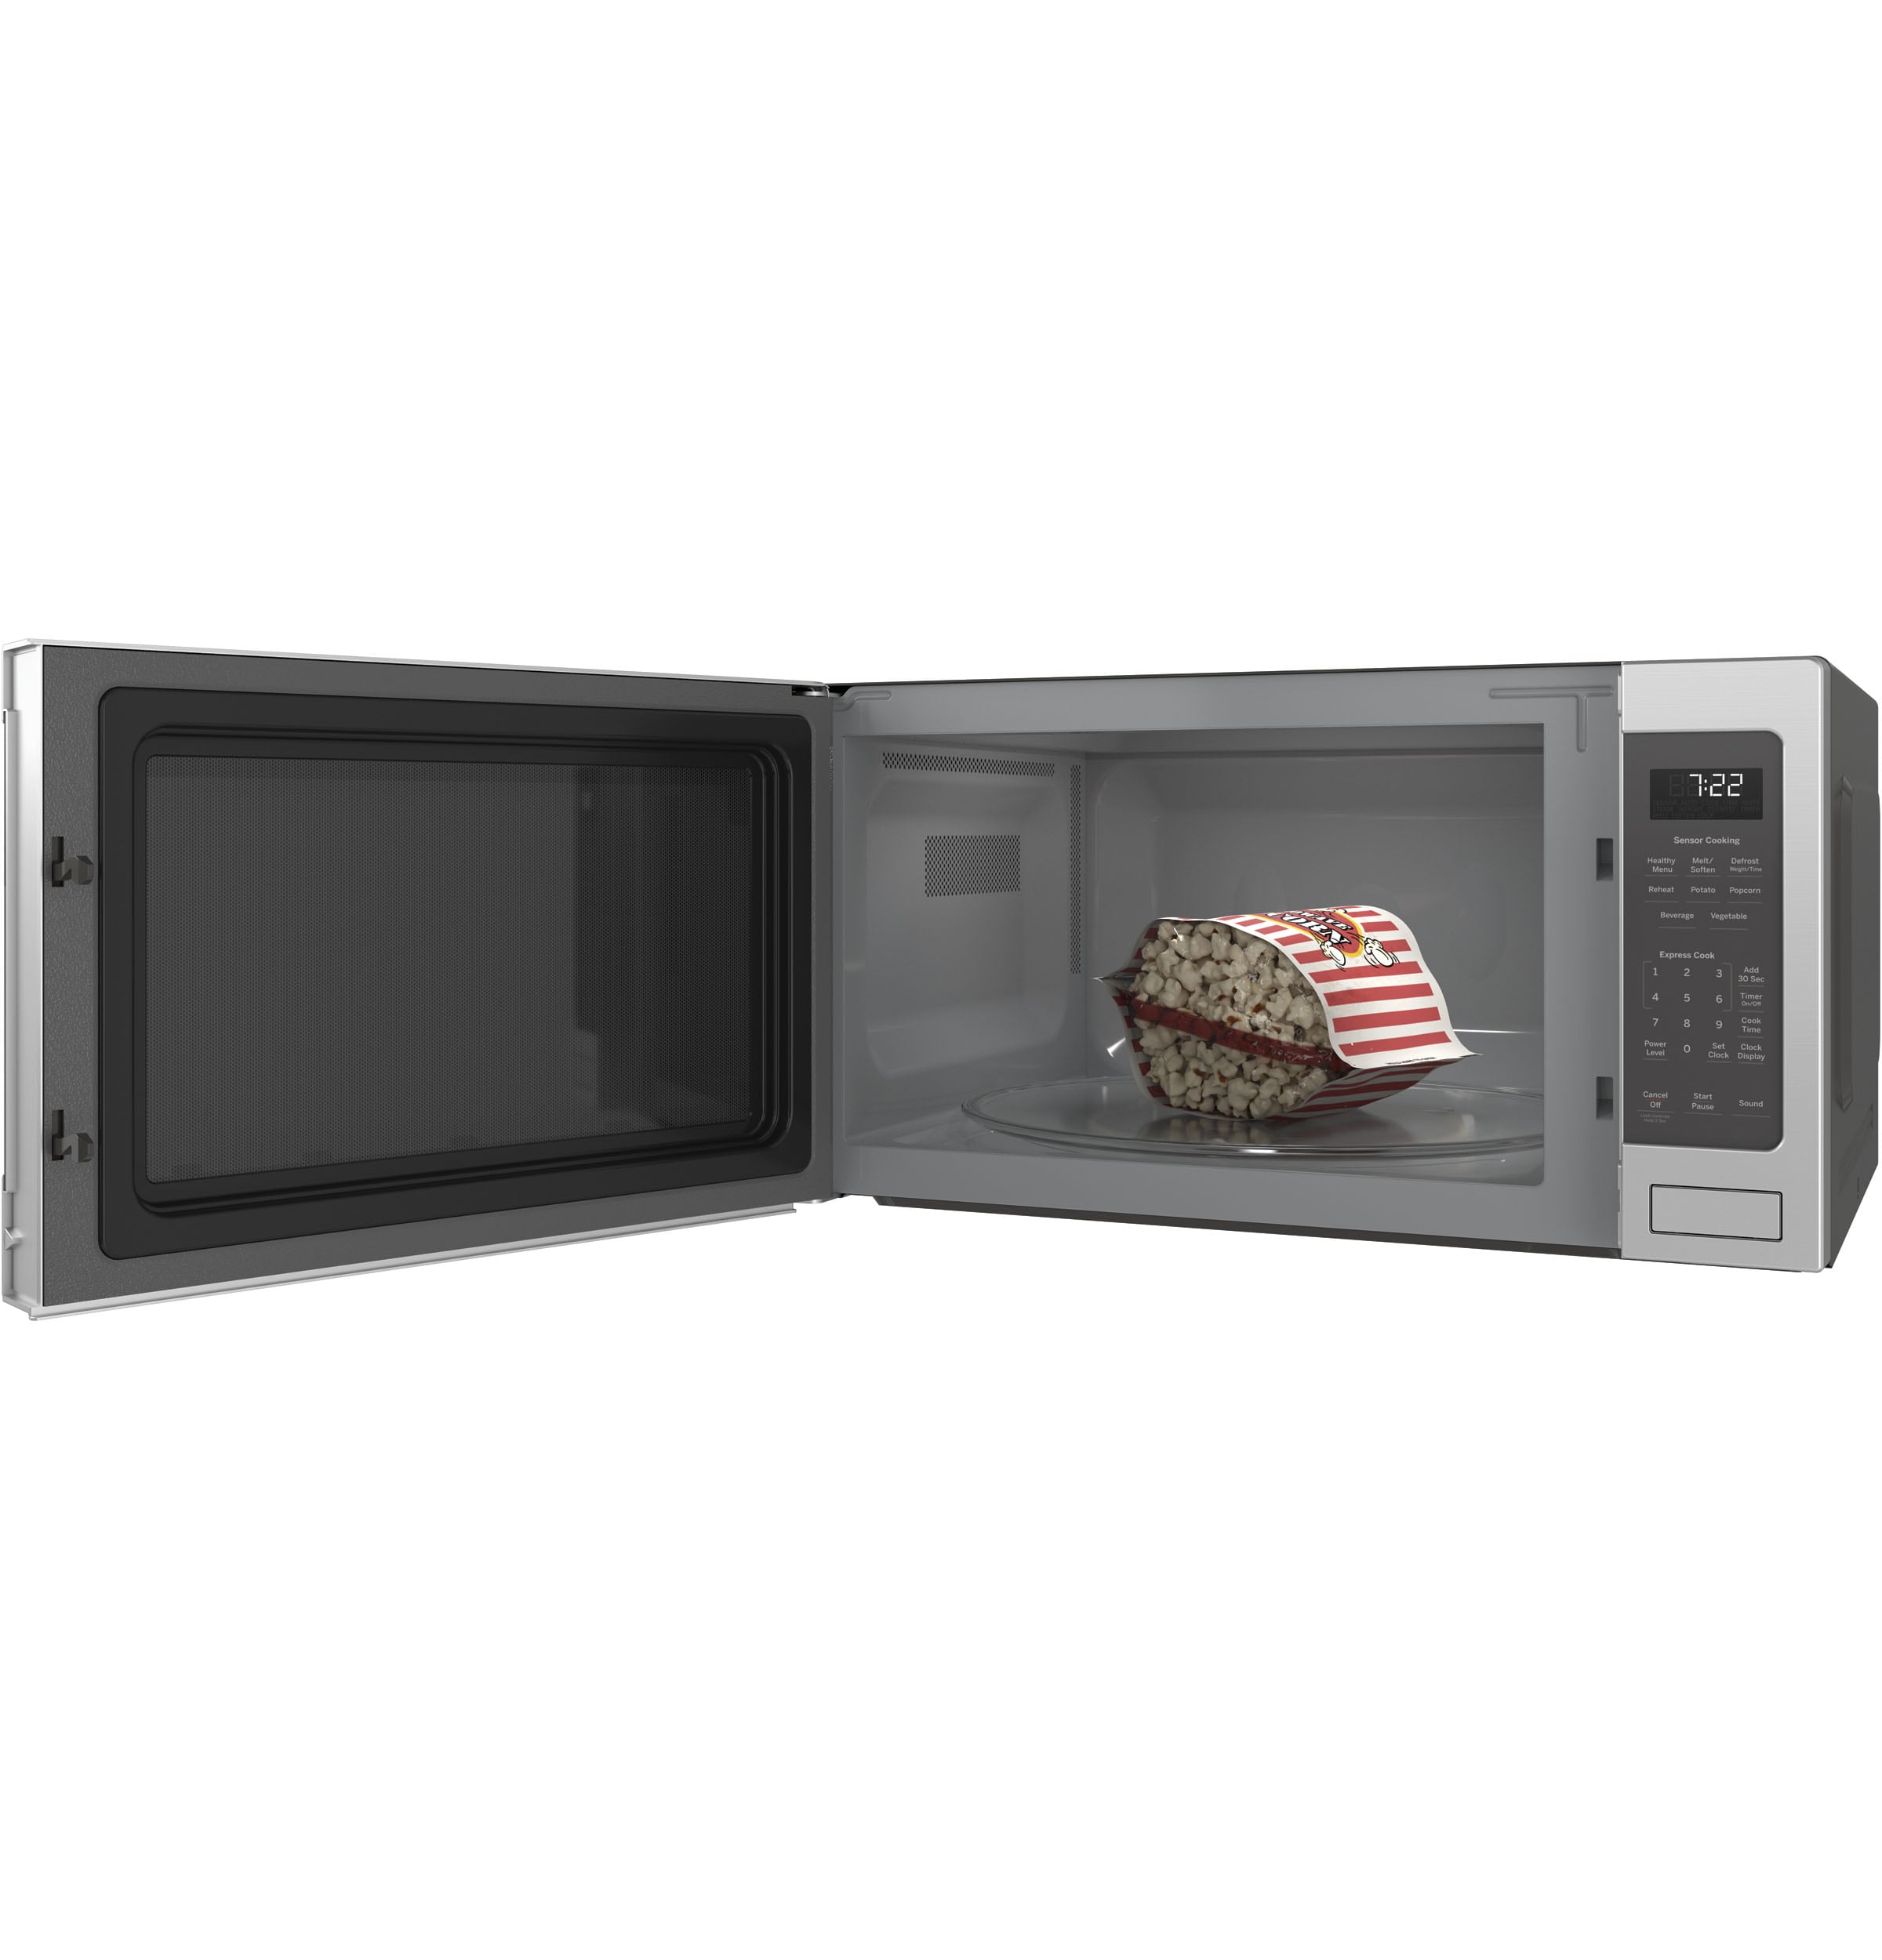 GE PEB2060SMSS 2.0 cu. ft. Countertop Microwave Oven with 1200 Watts, 6  Sensor Settings, 10 Power Levels, 16 Inch Turntable and ADA Compliant:  Stainless Steel